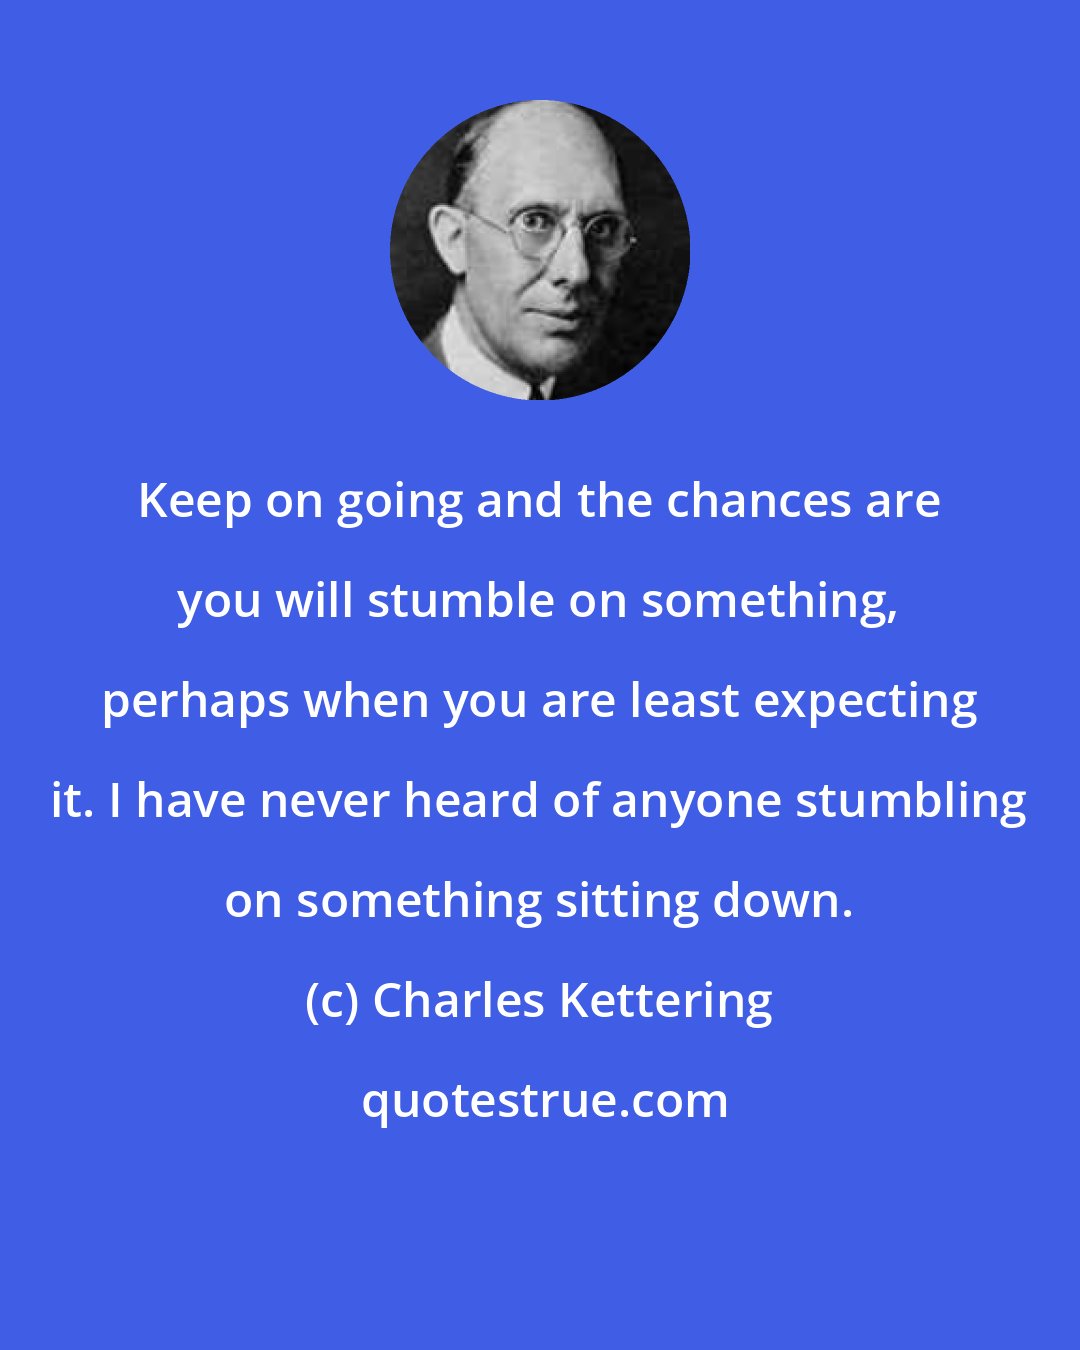 Charles Kettering: Keep on going and the chances are you will stumble on something, perhaps when you are least expecting it. I have never heard of anyone stumbling on something sitting down.